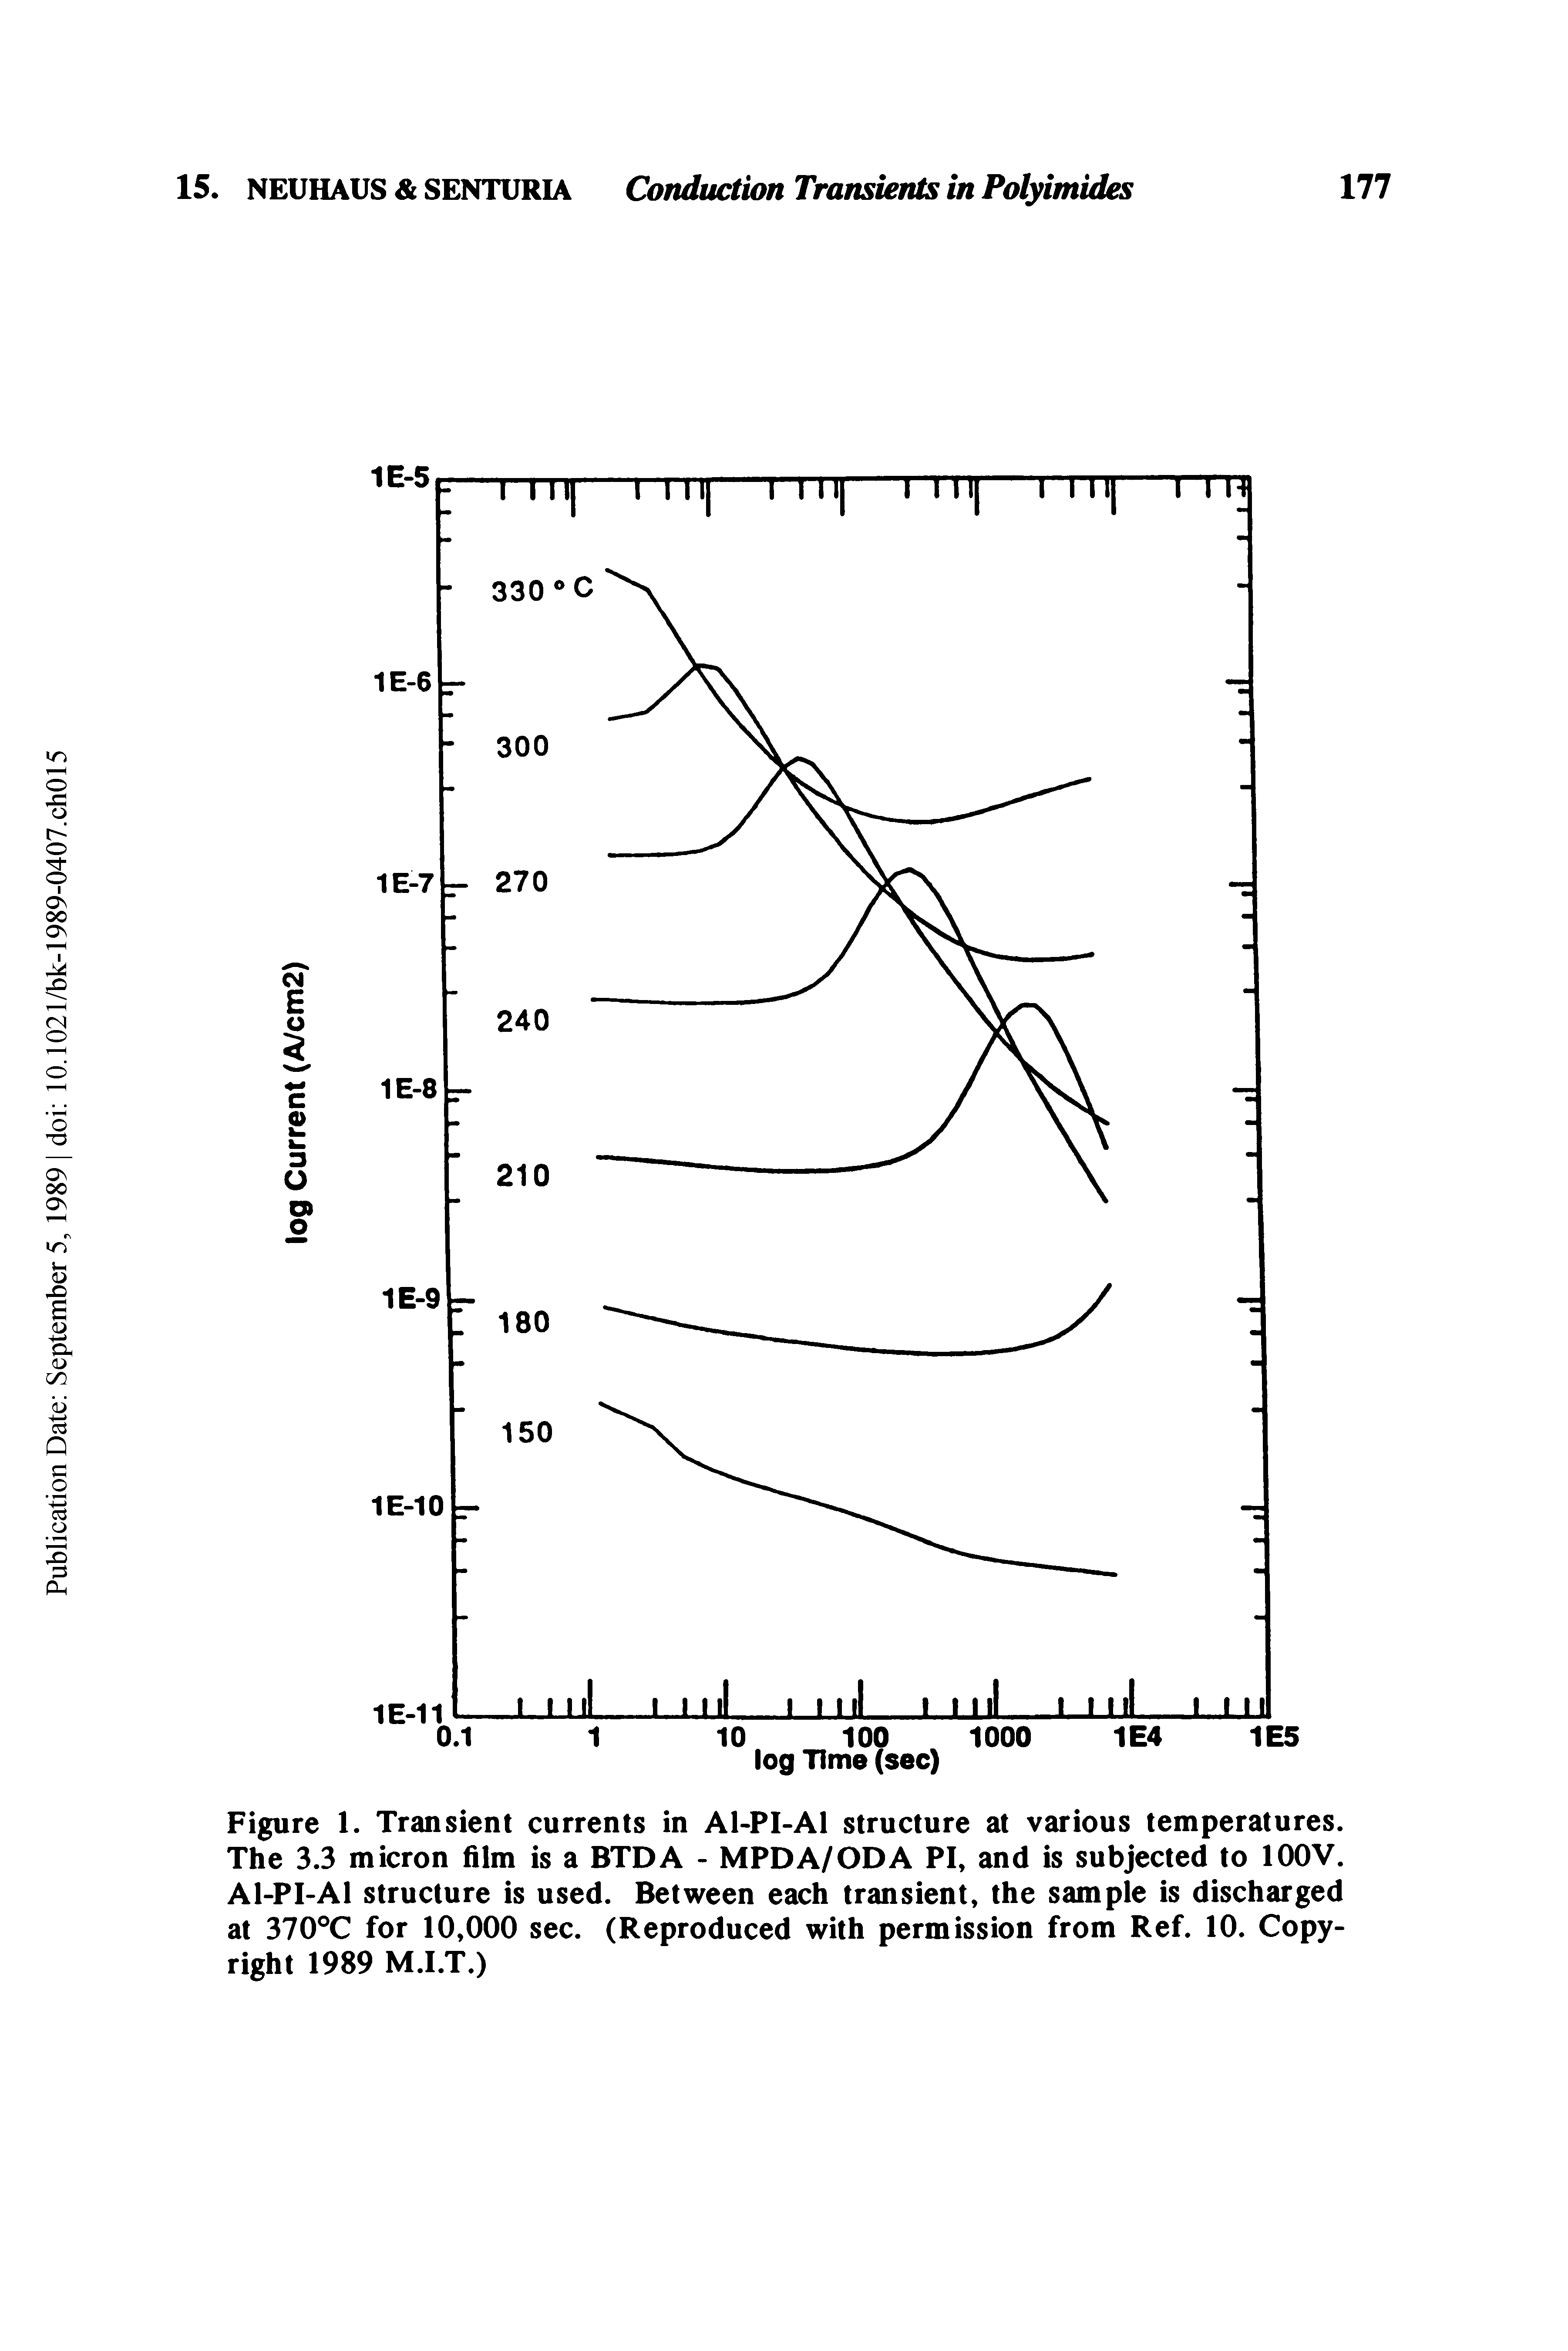 Figure 1. Transient currents in A1-PI-A1 structure at various temperatures. The 3.3 micron film is a BTDA - MPDA/ODA PI, and is subjected to 100V. A1-PI-A1 structure is used. Between each transient, the sample is discharged at 370°C for 10,000 sec. (Reproduced with permission from Ref. 10. Copyright 1989 M.I.T.)...